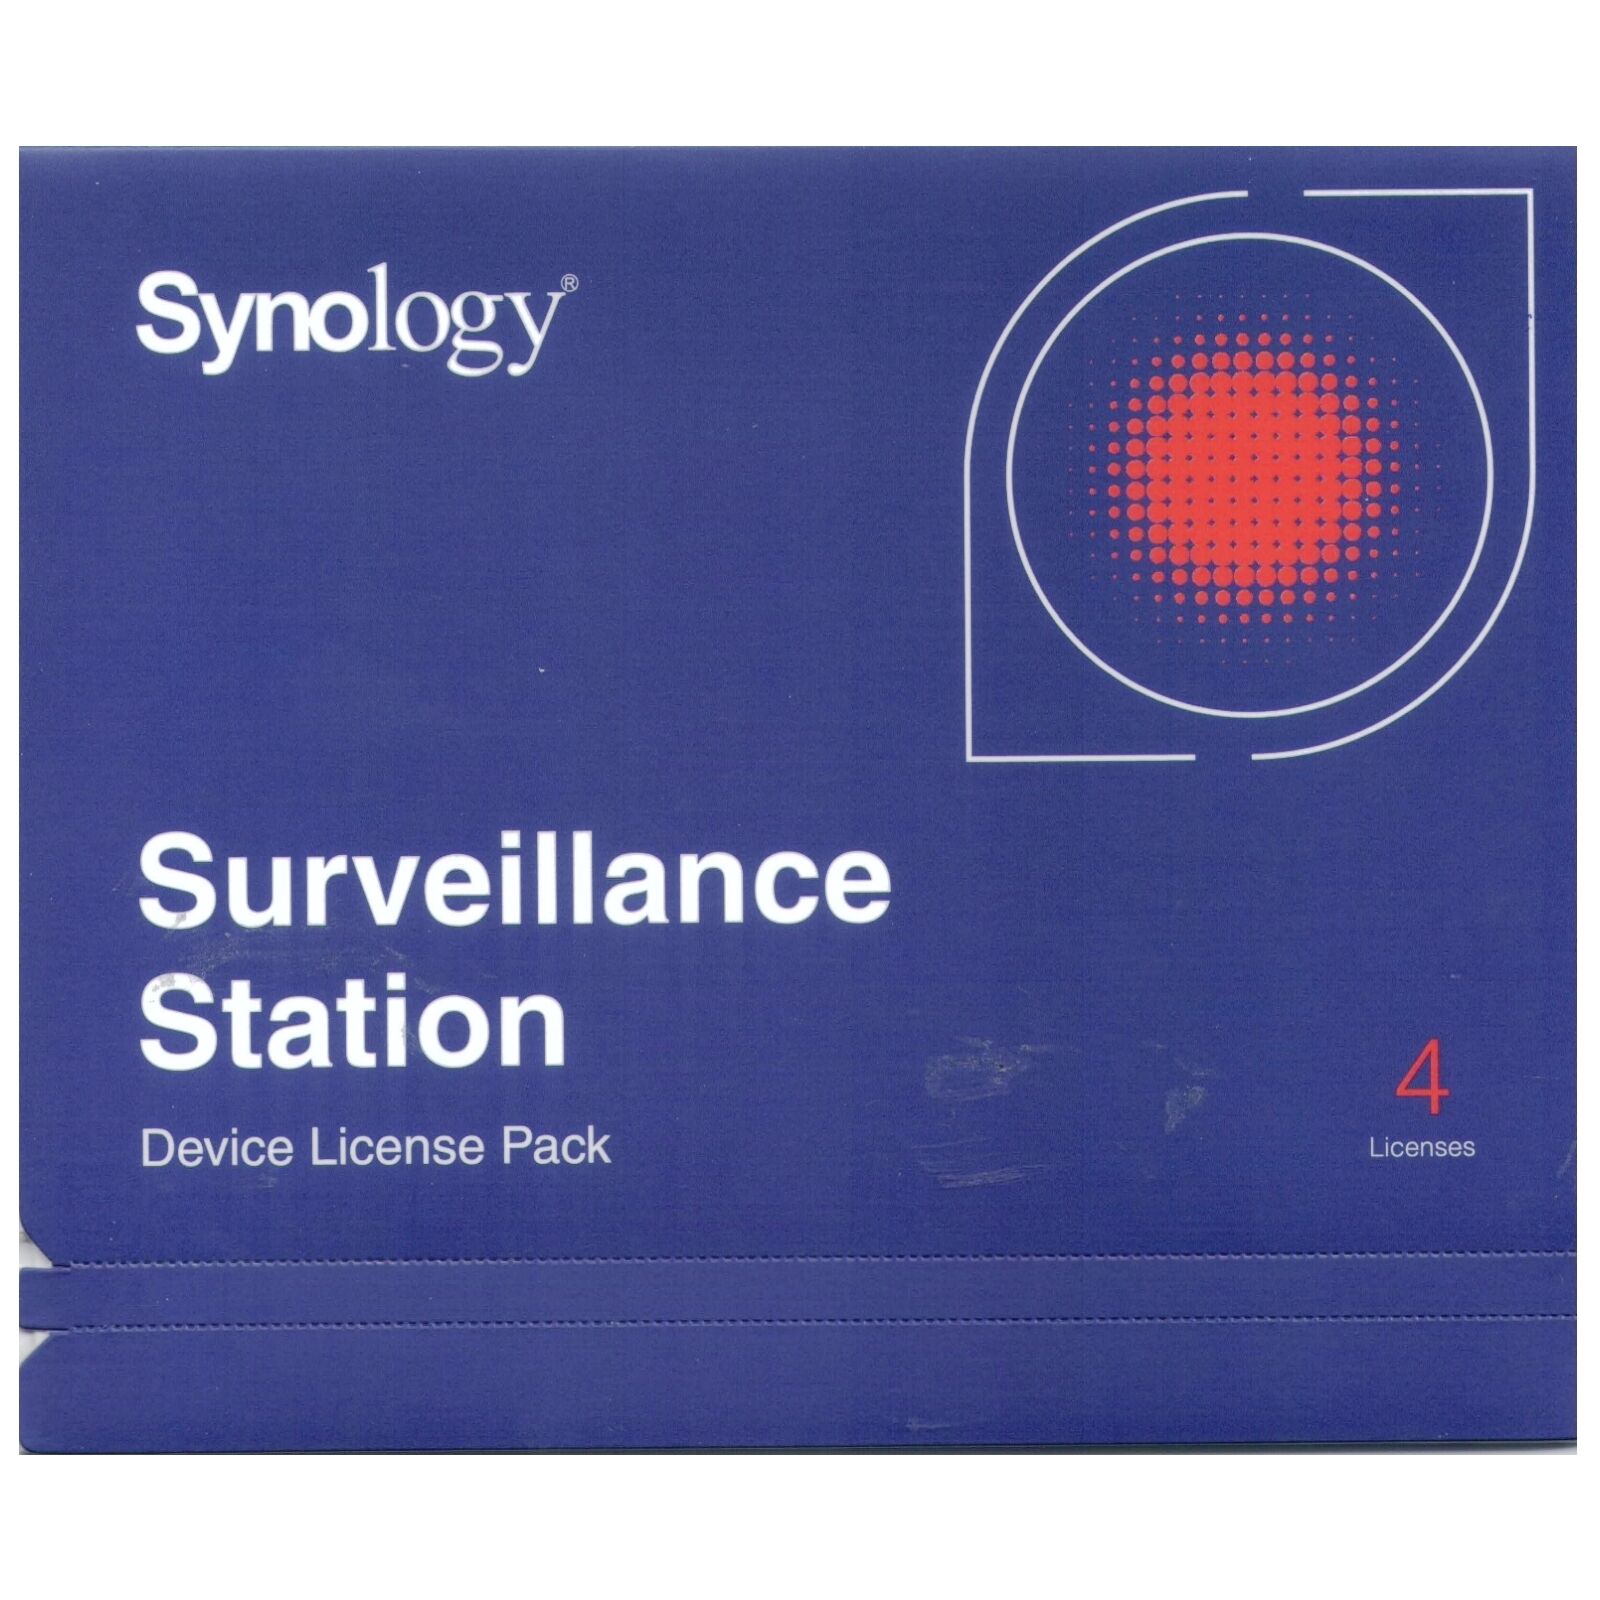 Synology IP Camera 4-License Pack Kit for Surveillance Station - DS1618+ DS718+